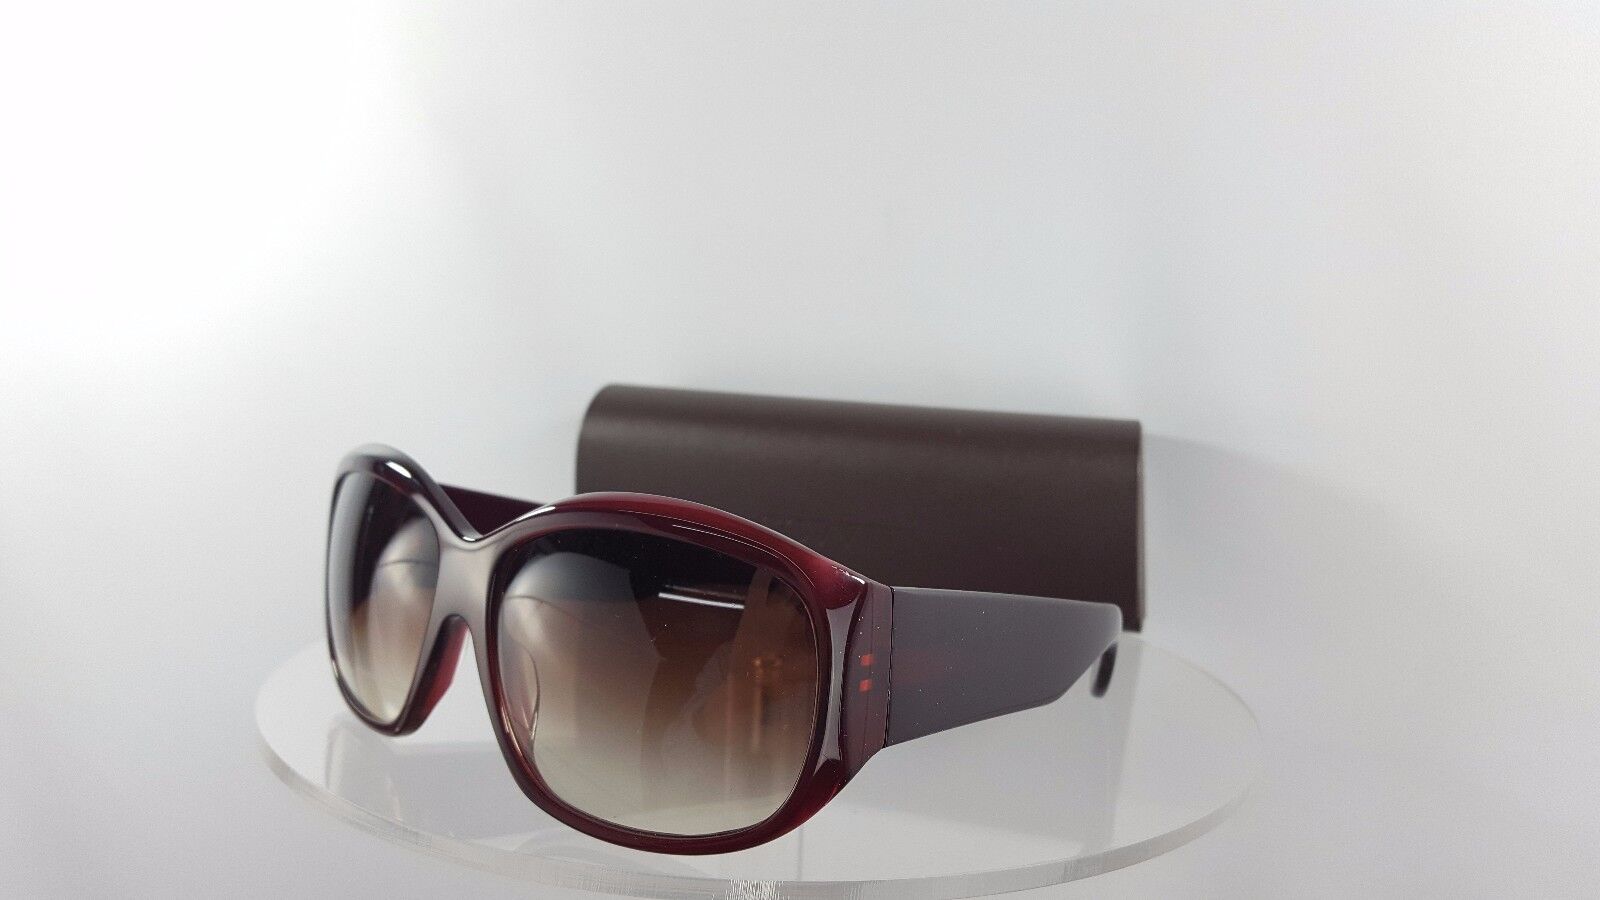 Brand New Authentic Oliver Peoples Sunglasses OV 5181 S 1053/13 De LaC Burgundy